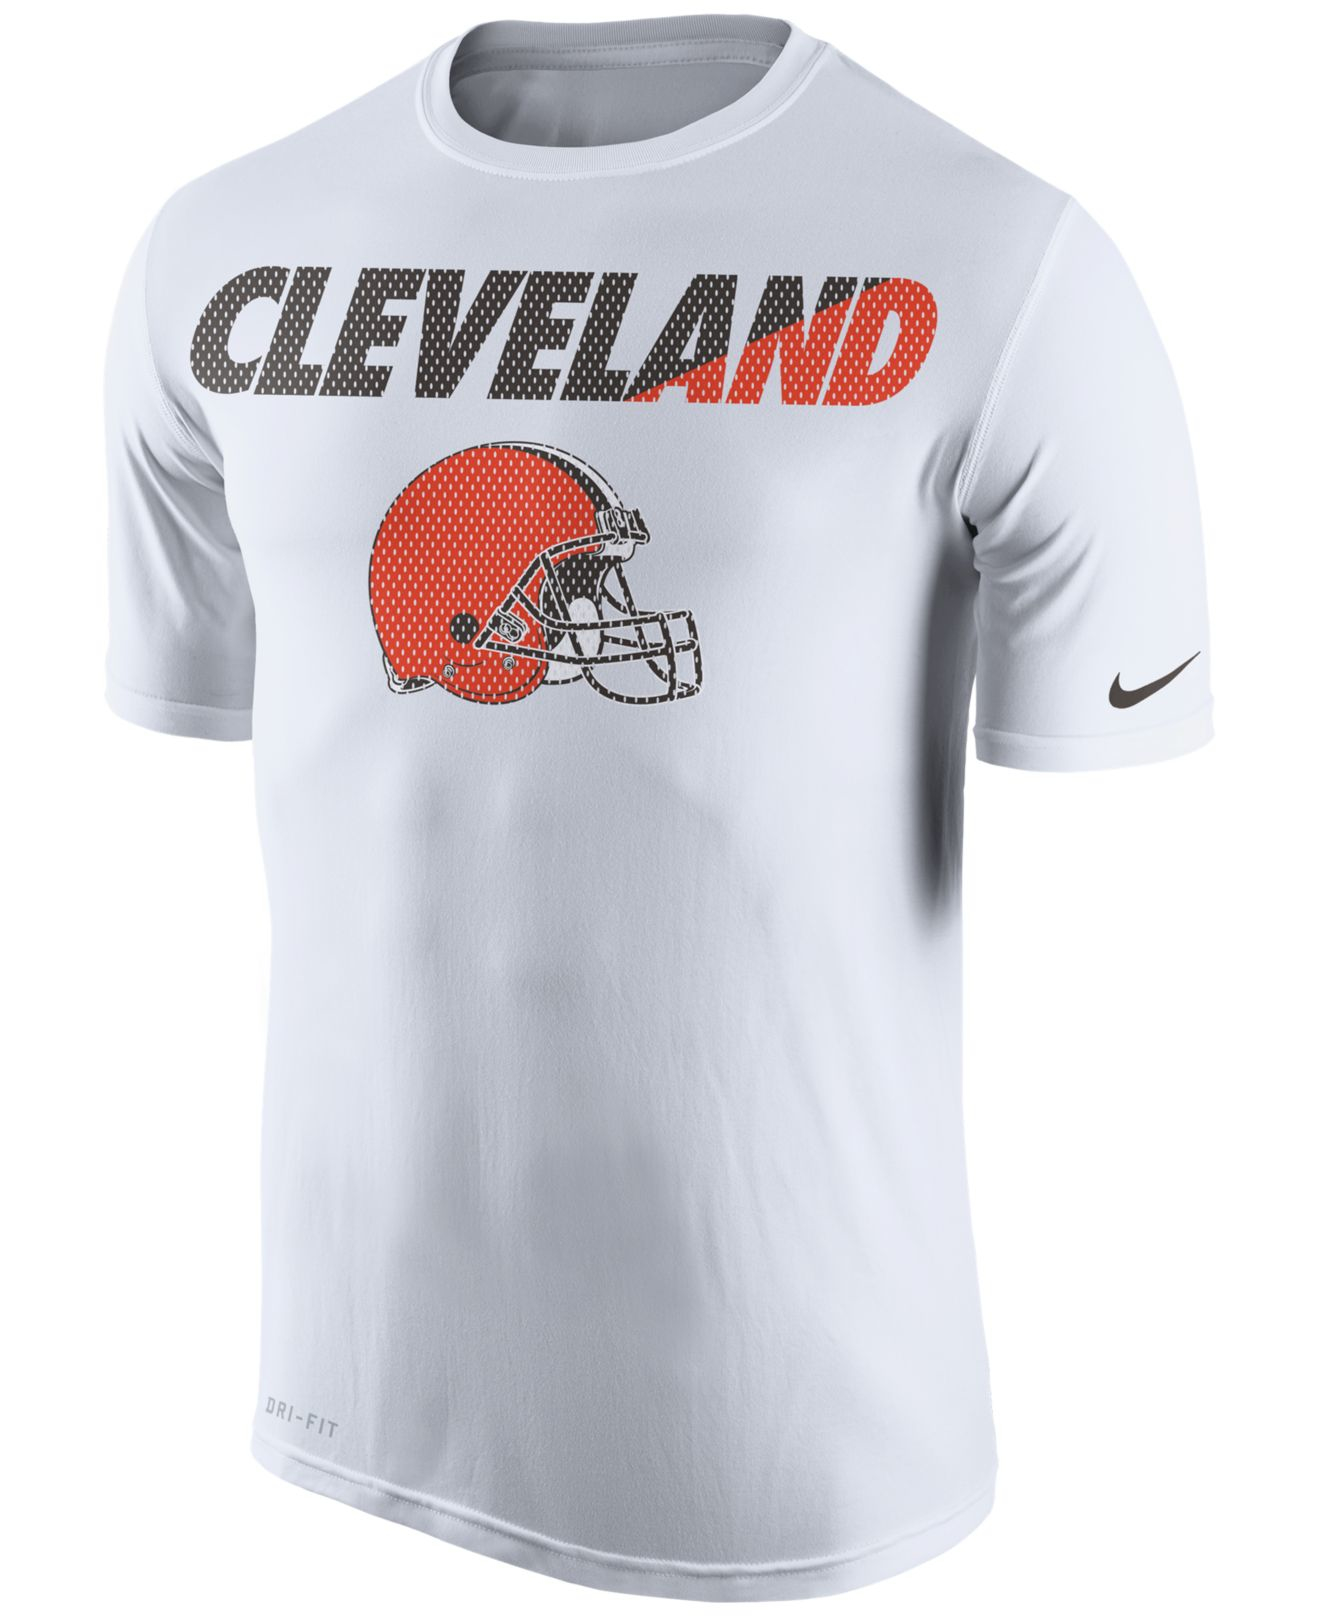 Lyst - Nike Men's Cleveland Browns Legend Staff Practice T-shirt in ...